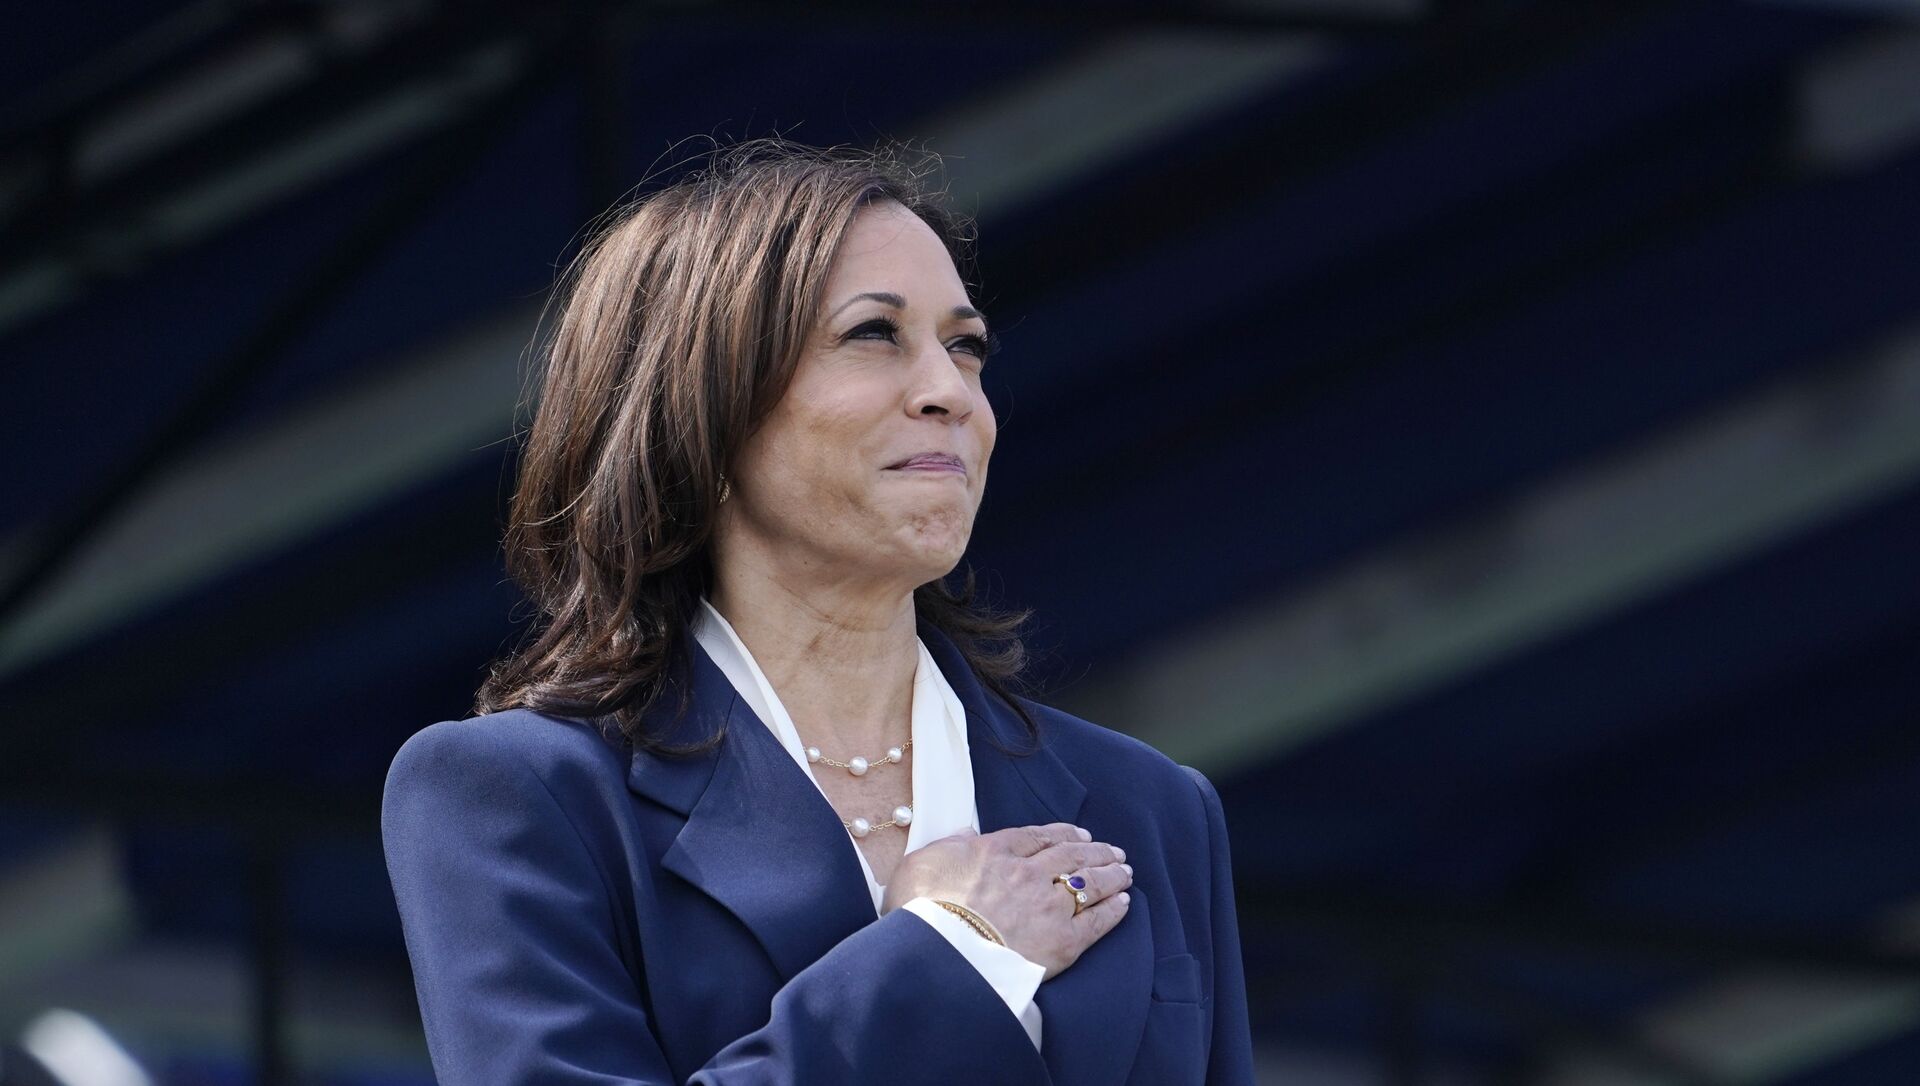 Vice President Kamala Harris stands during the National Anthem at the graduation and commissioning ceremony at the U.S. Naval Academy in Annapolis, Md., Friday, May 28, 2021 - Sputnik International, 1920, 14.06.2021